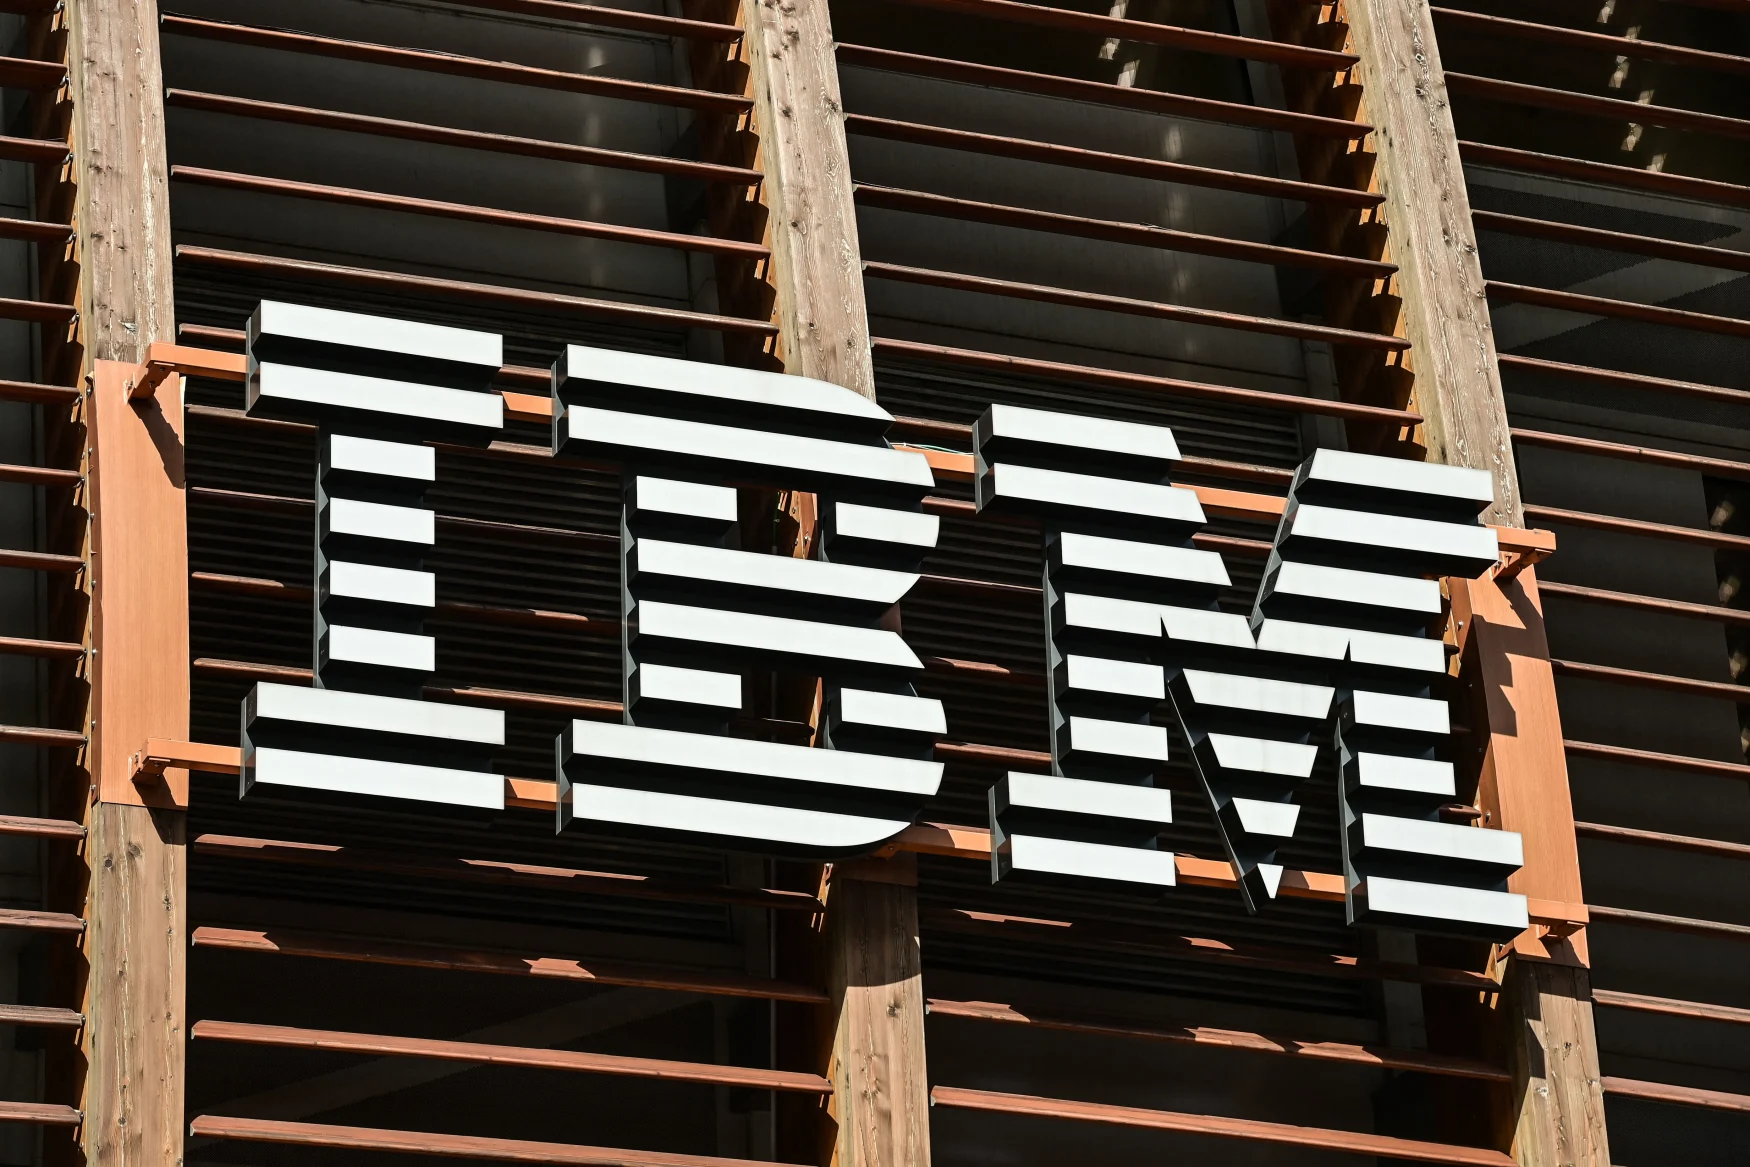 The IBM logo is pictured in the Garibaldi-Porta Nuova modern district of Milan  on June 22, 2021. (Photo by MIGUEL MEDINA / AFP) (Photo by MIGUEL MEDINA/AFP via Getty Images)